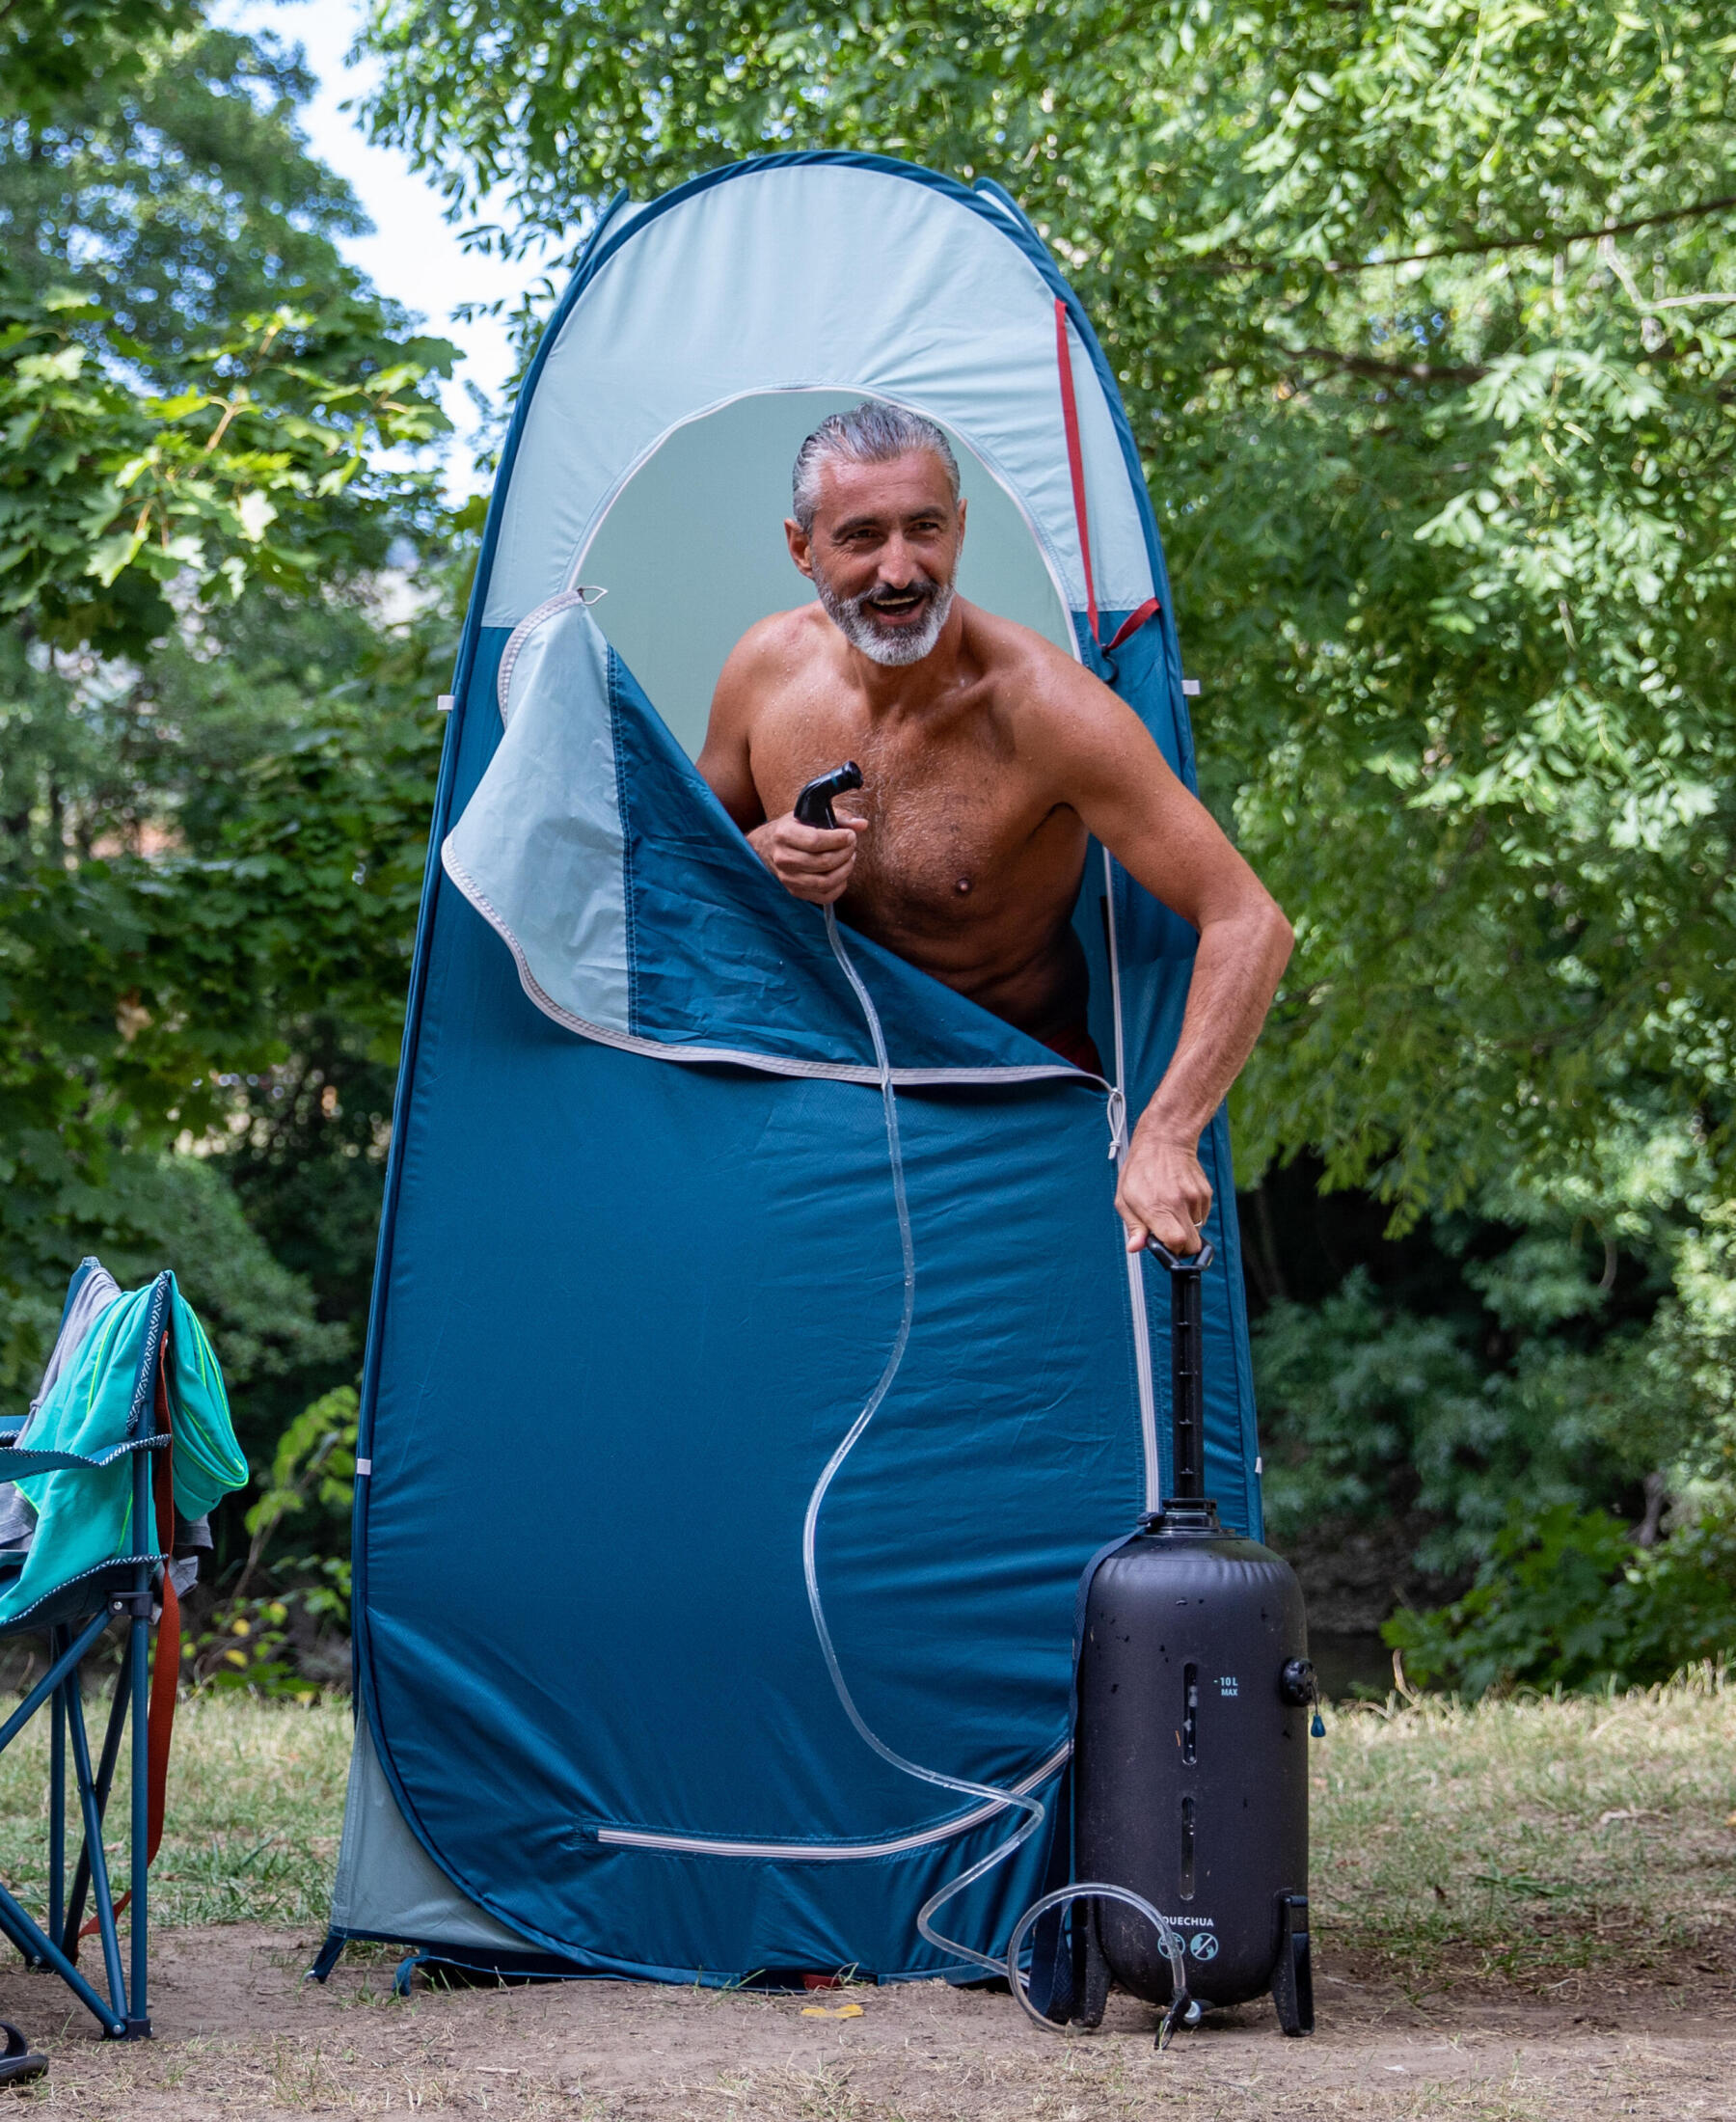 How to choose a portable shower